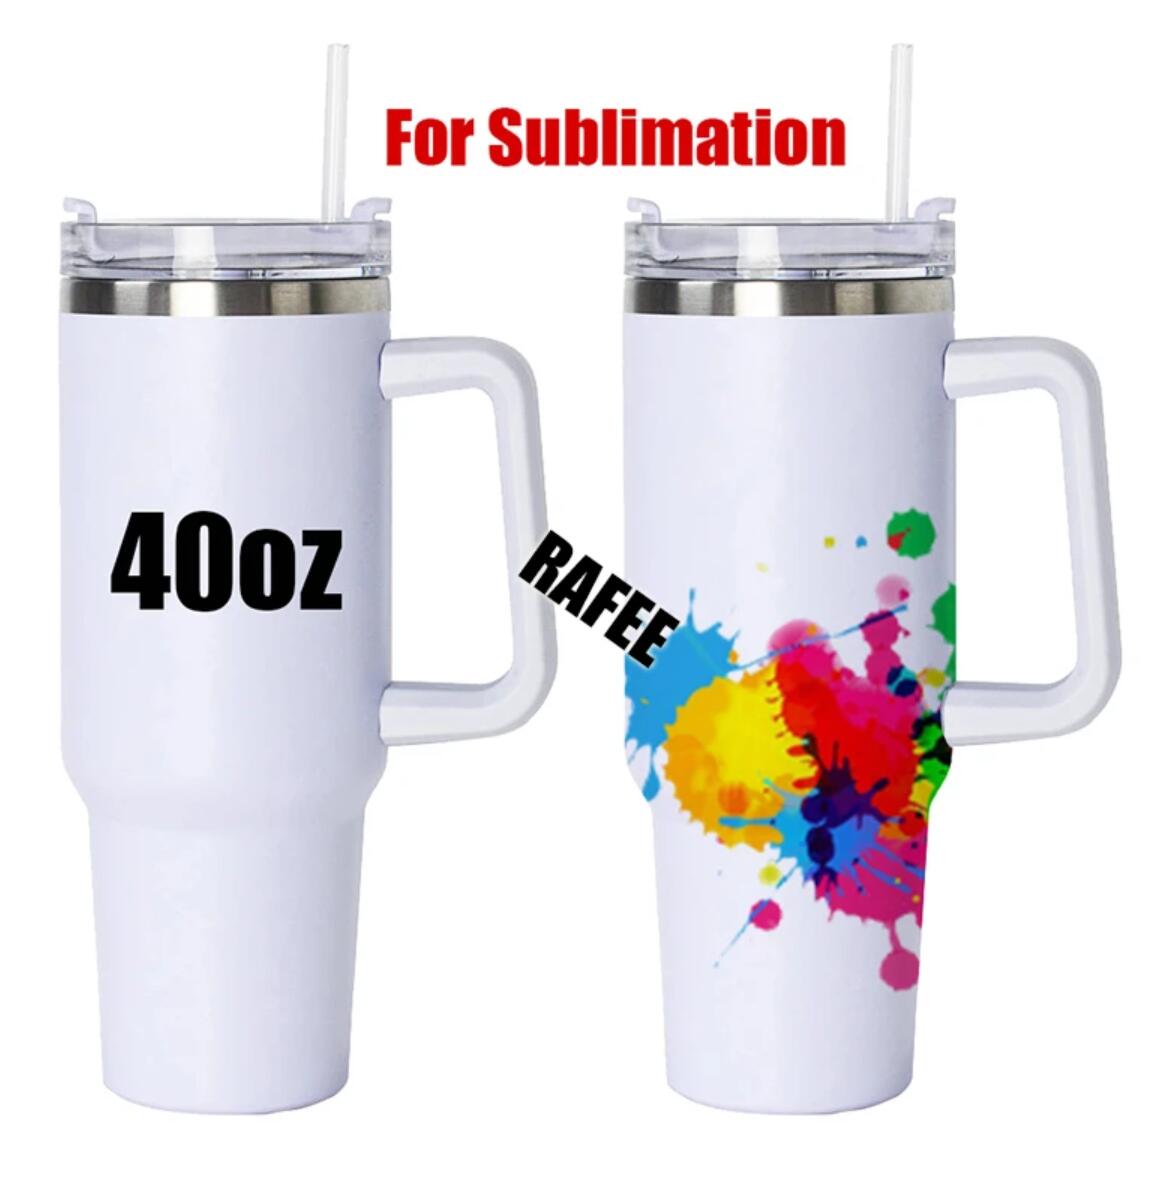 

40oz Sublimation Blanks Tumblers Handle Stainless Steel Coffee Thermal Cups 40 oz Insulated Travel Mugs Drinkware Bulk Wholesale GG0508, White